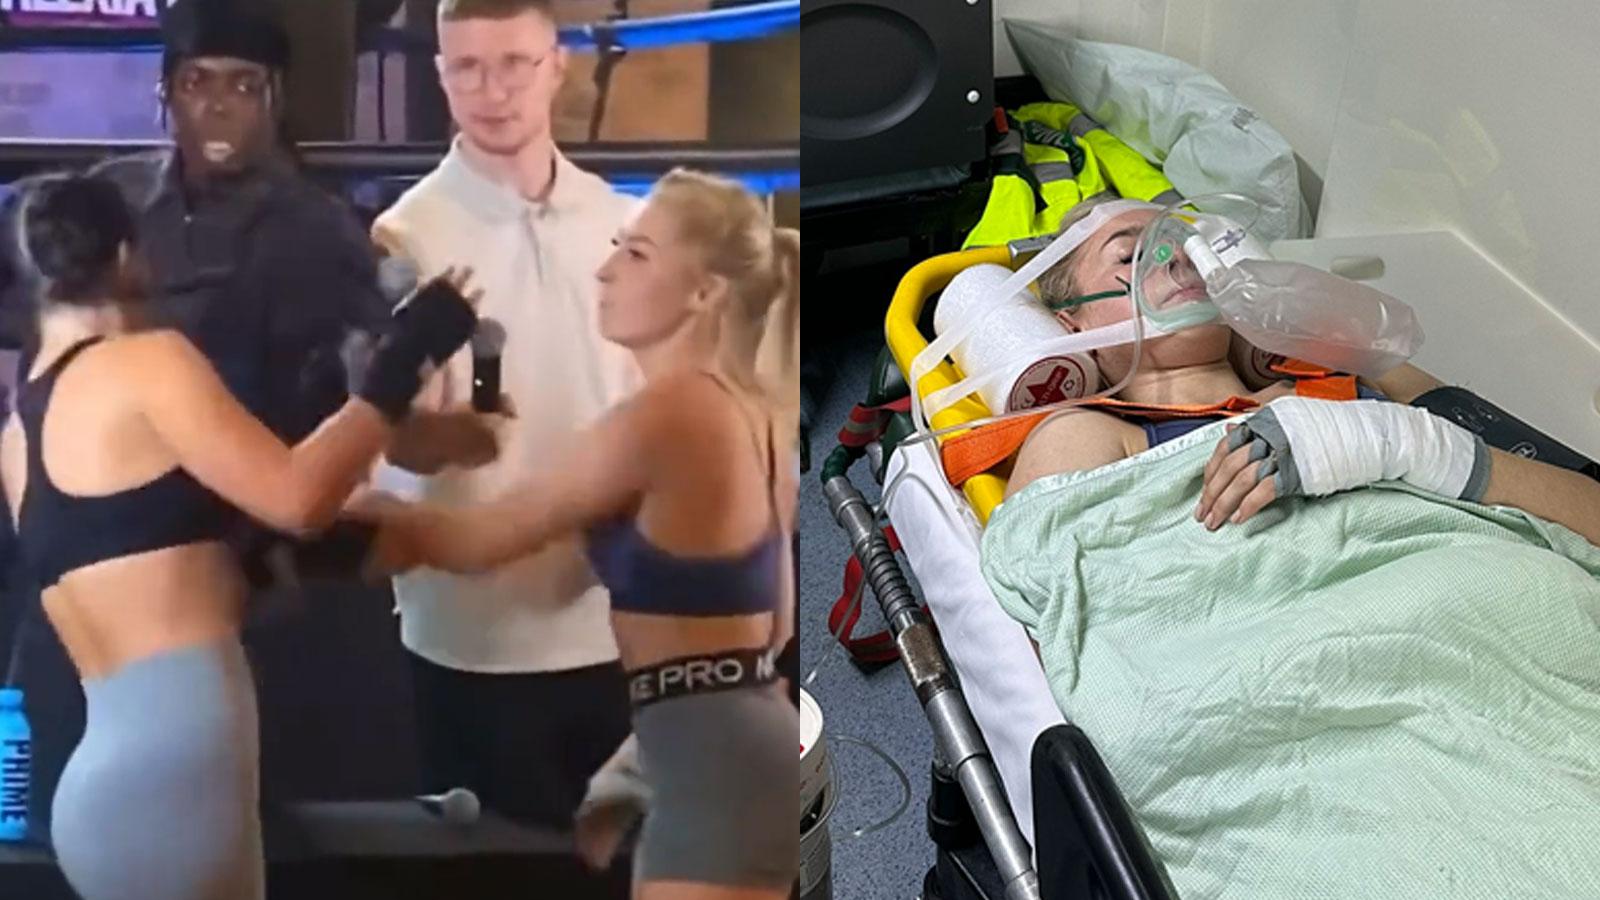 Astrid Wett slapping Alexia Grace and another photo of Astrid Wett lying on stretcher in ambulance